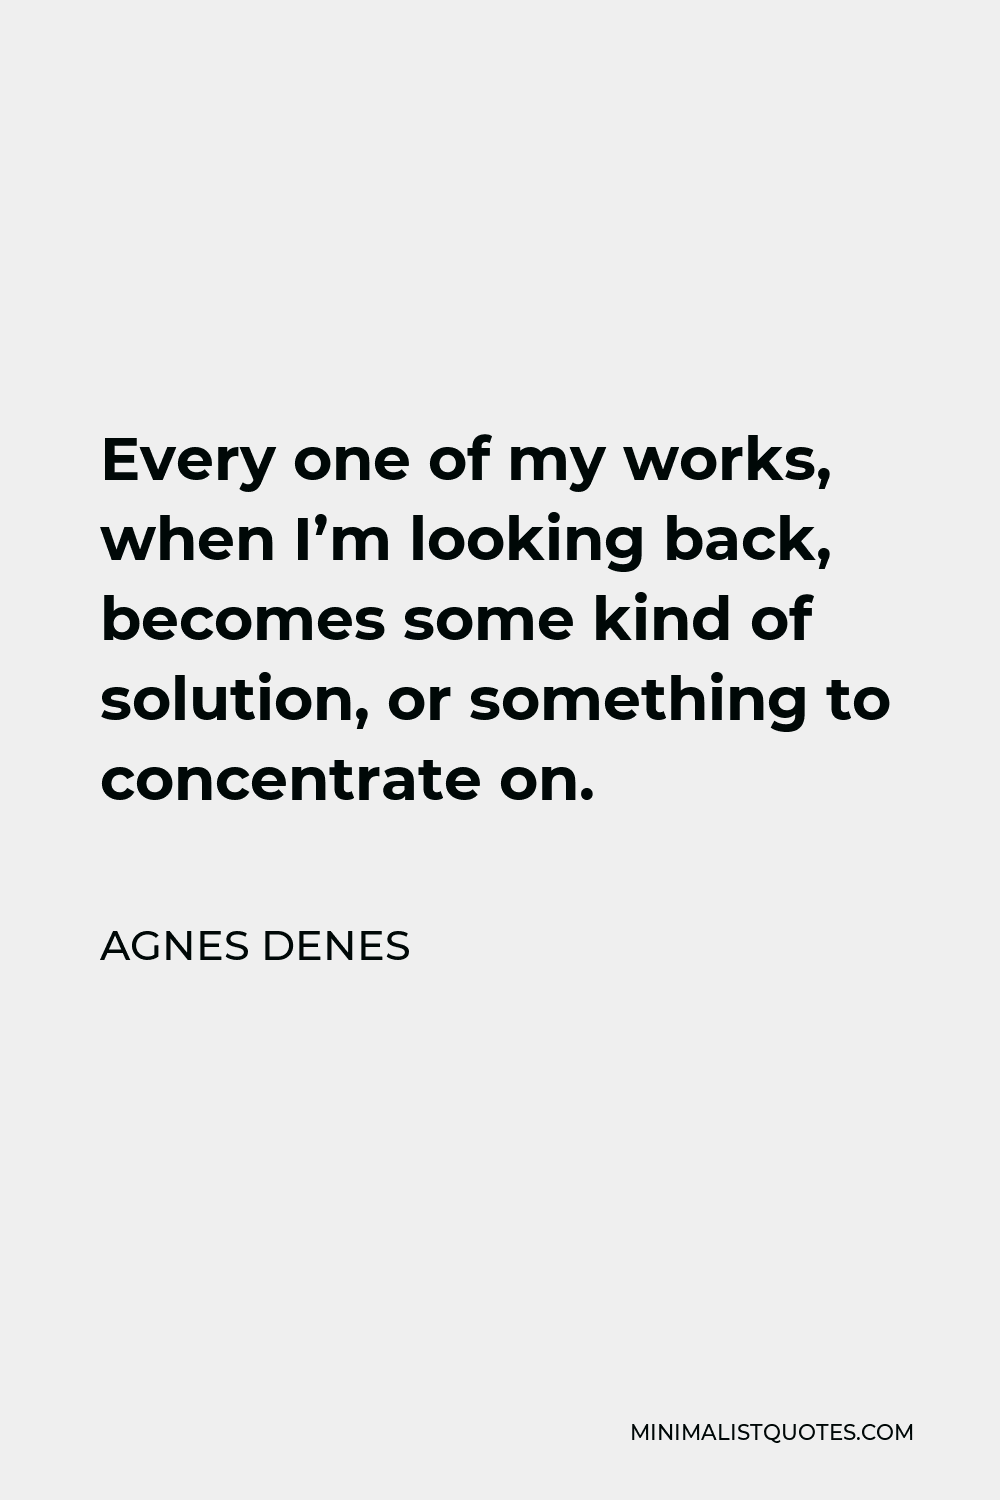 Agnes Denes Quote - Every one of my works, when I’m looking back, becomes some kind of solution, or something to concentrate on.